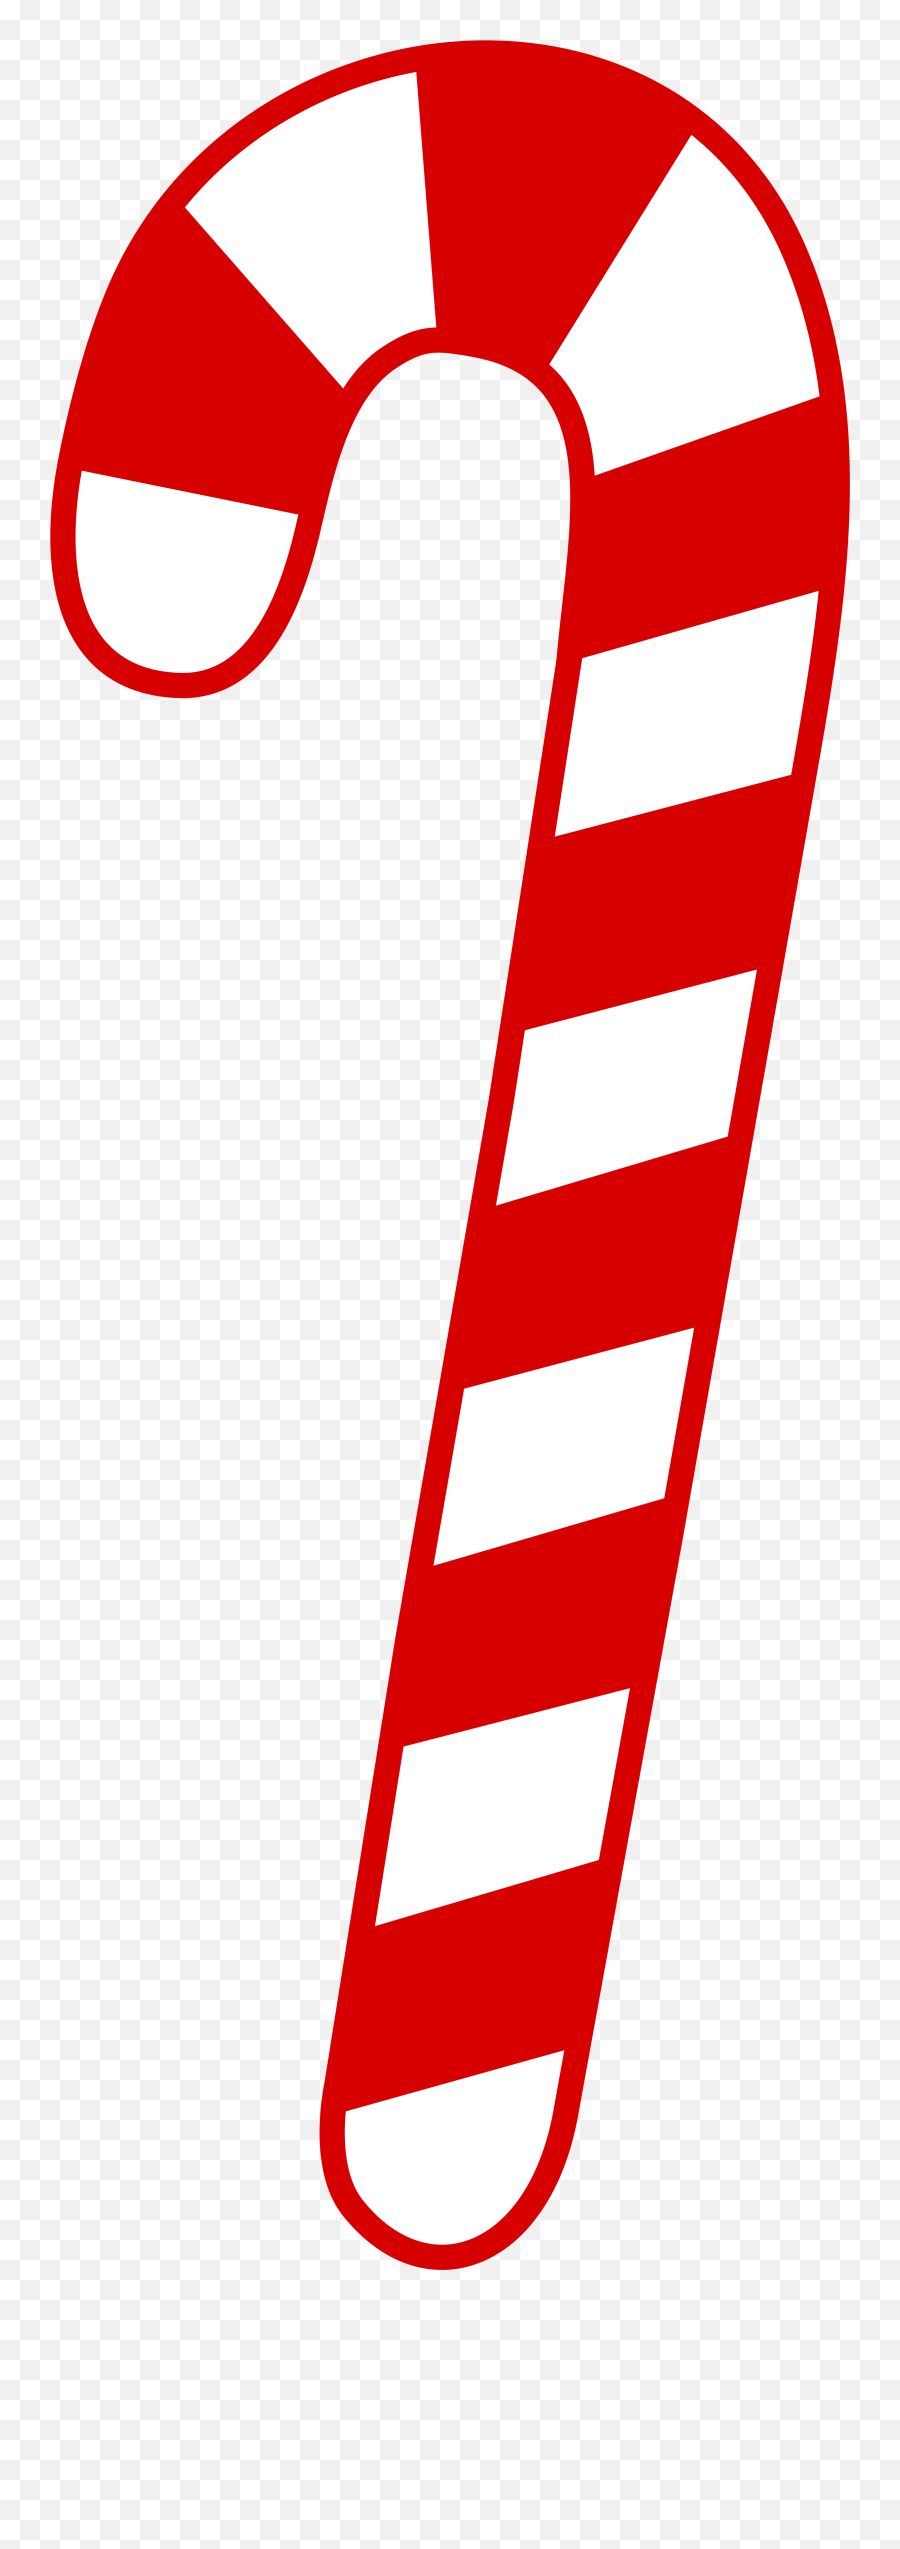 Free Candy Cane Download Free Clip Art - Christmas Clipart Candy Cane Emoji,Peppermint Emoji